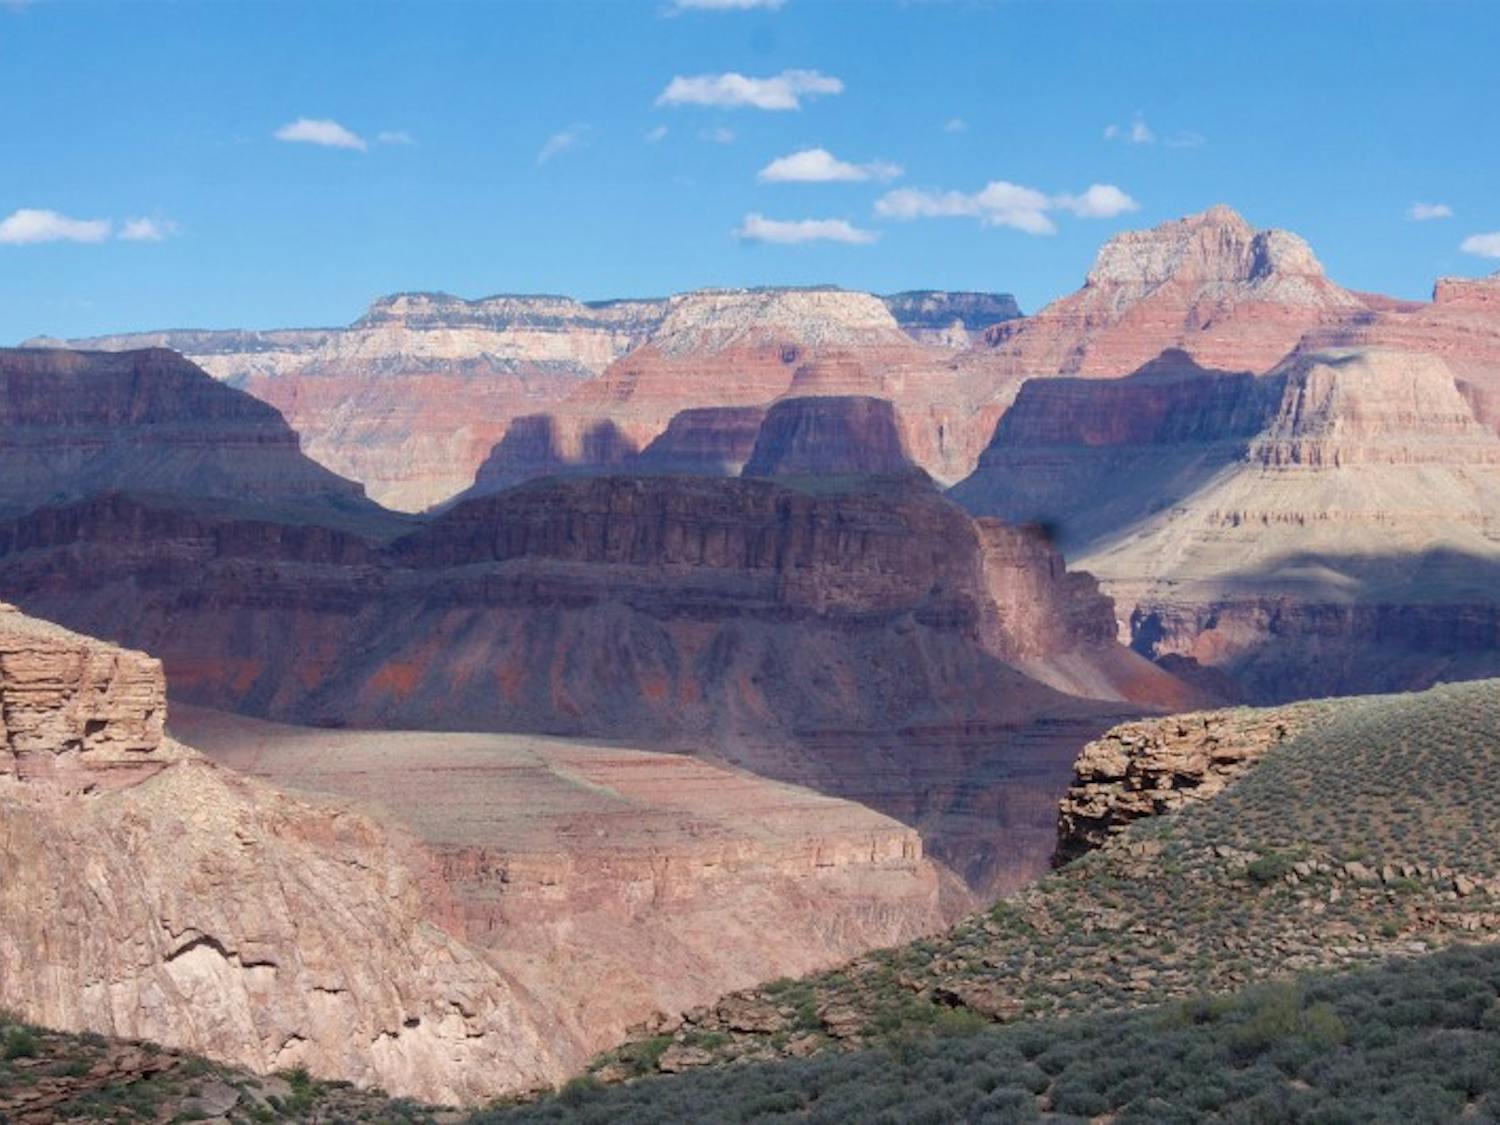 The Grand Canyon is a layer cake that tells the geological story of the last two billion years. The canyon gives visitors a rare opportunity to see the distinct layers that form the Earth. (Brad Branan/Sacramento Bee/TNS)